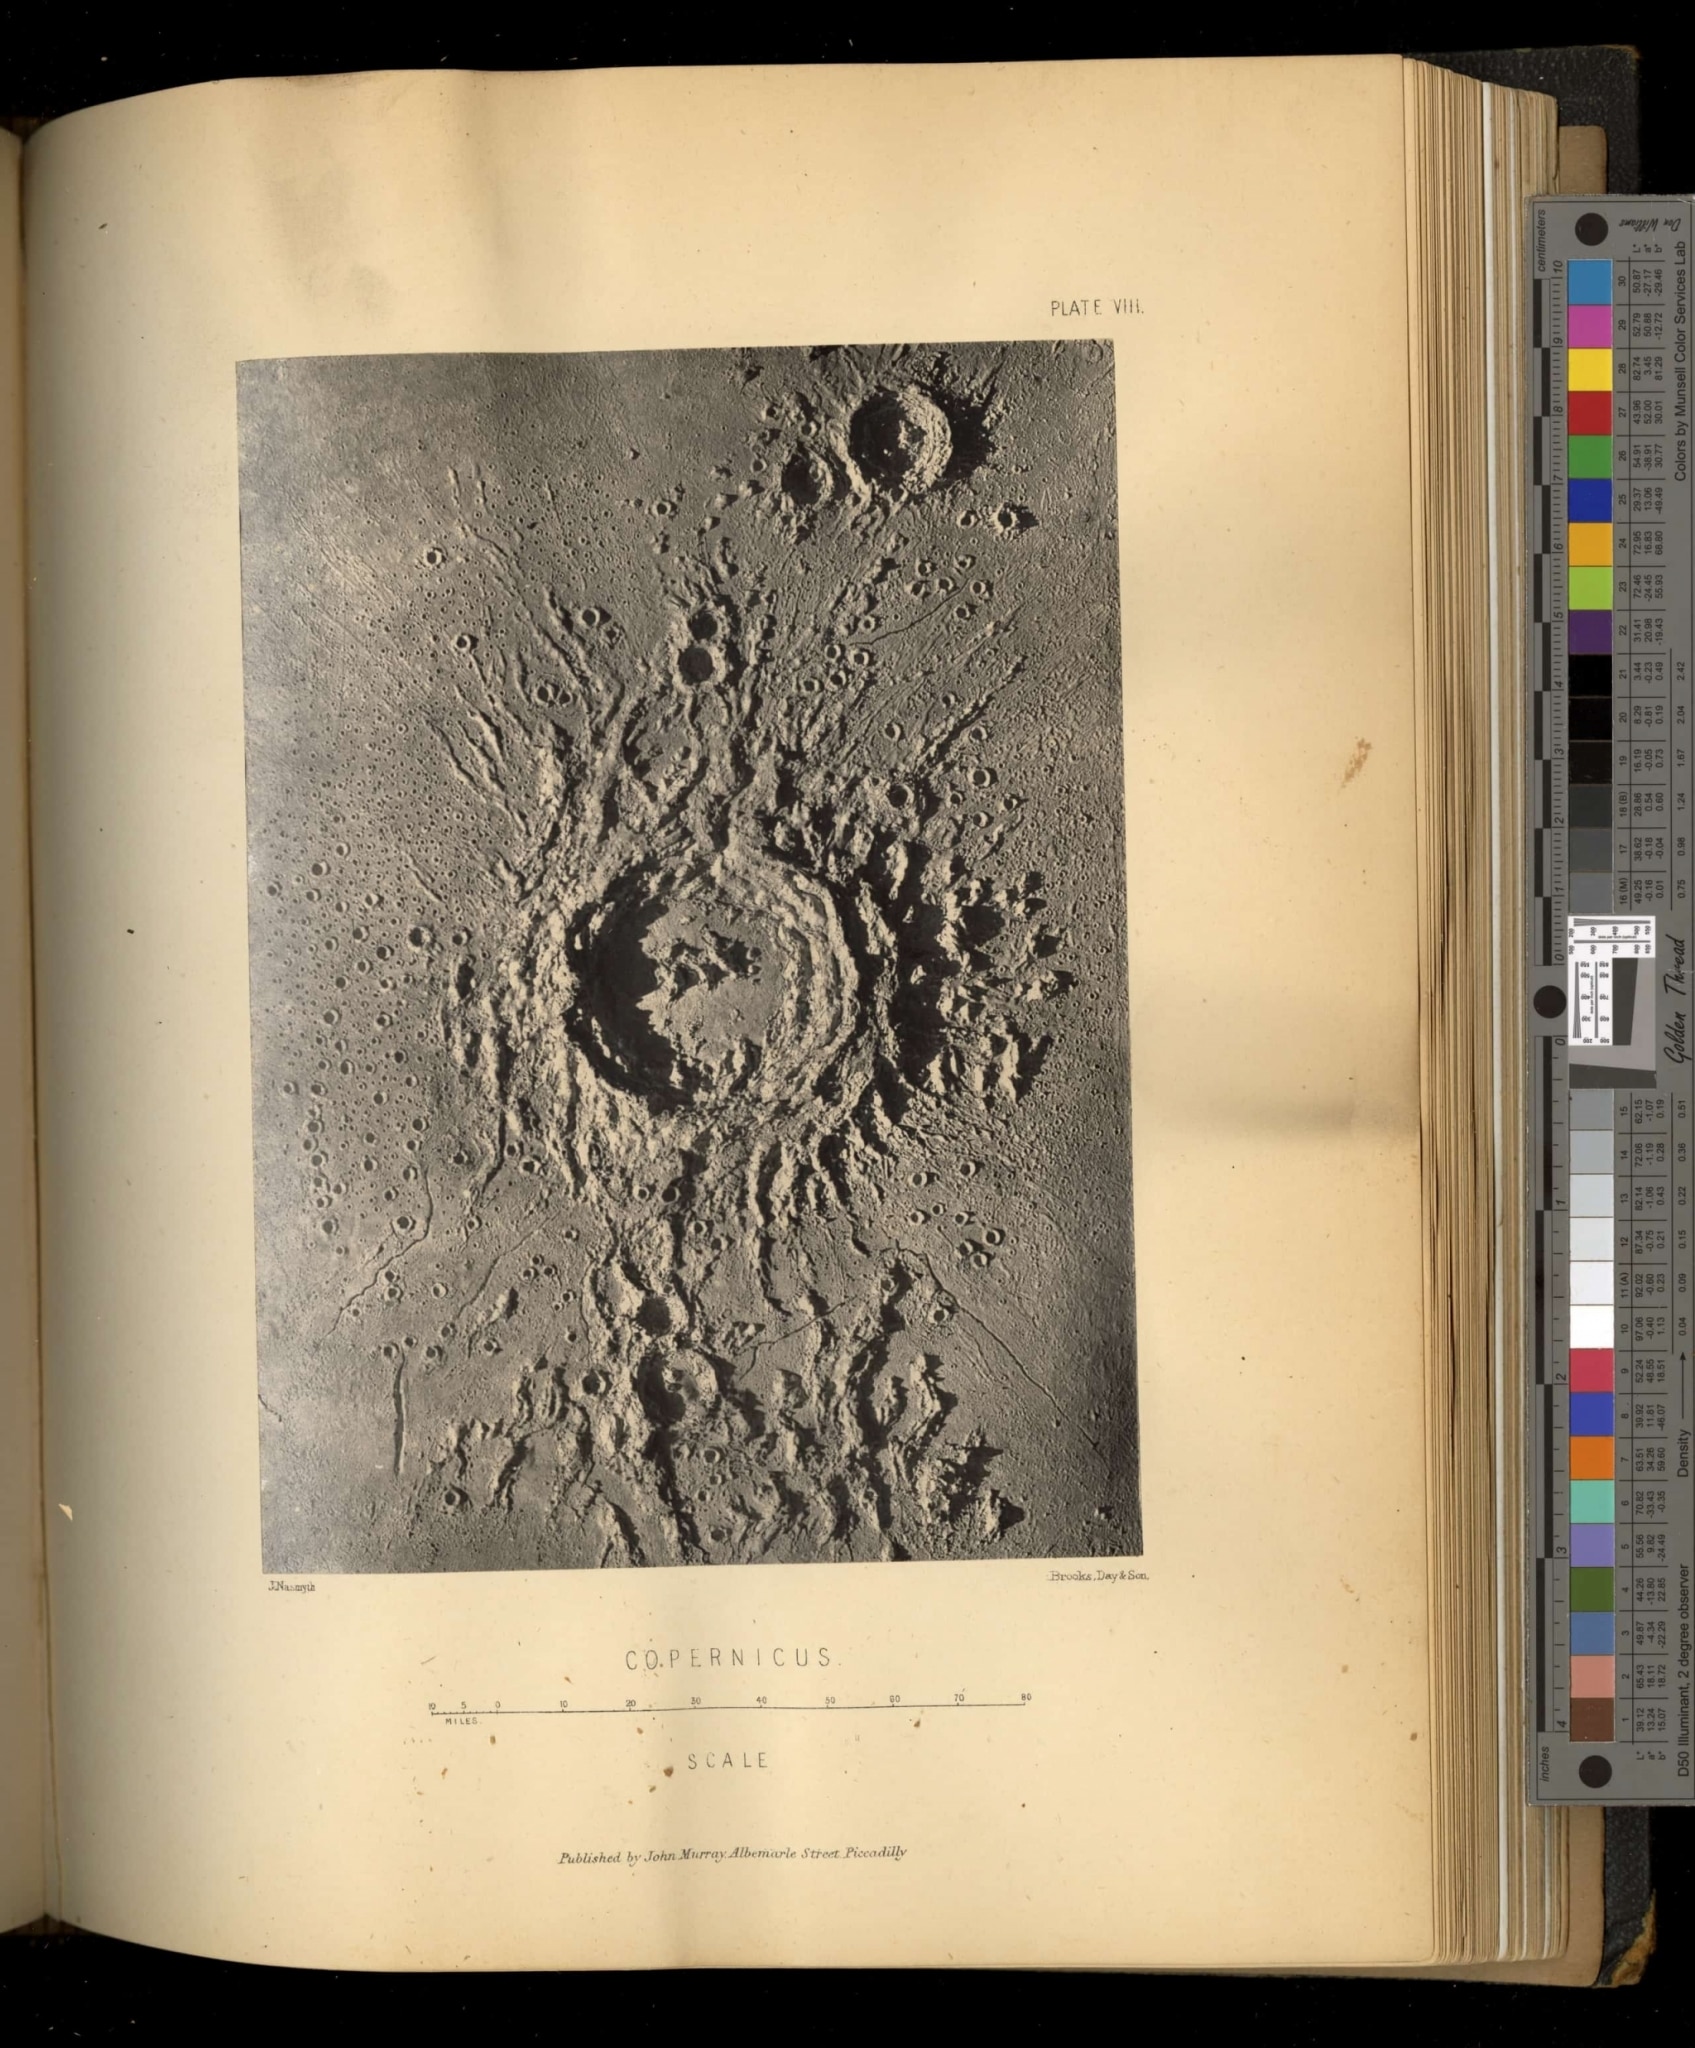 Cast of the moon, Nasmyth & Carpenter, The Moon: Considered as a Planet, A World, and a Satellite (1874)